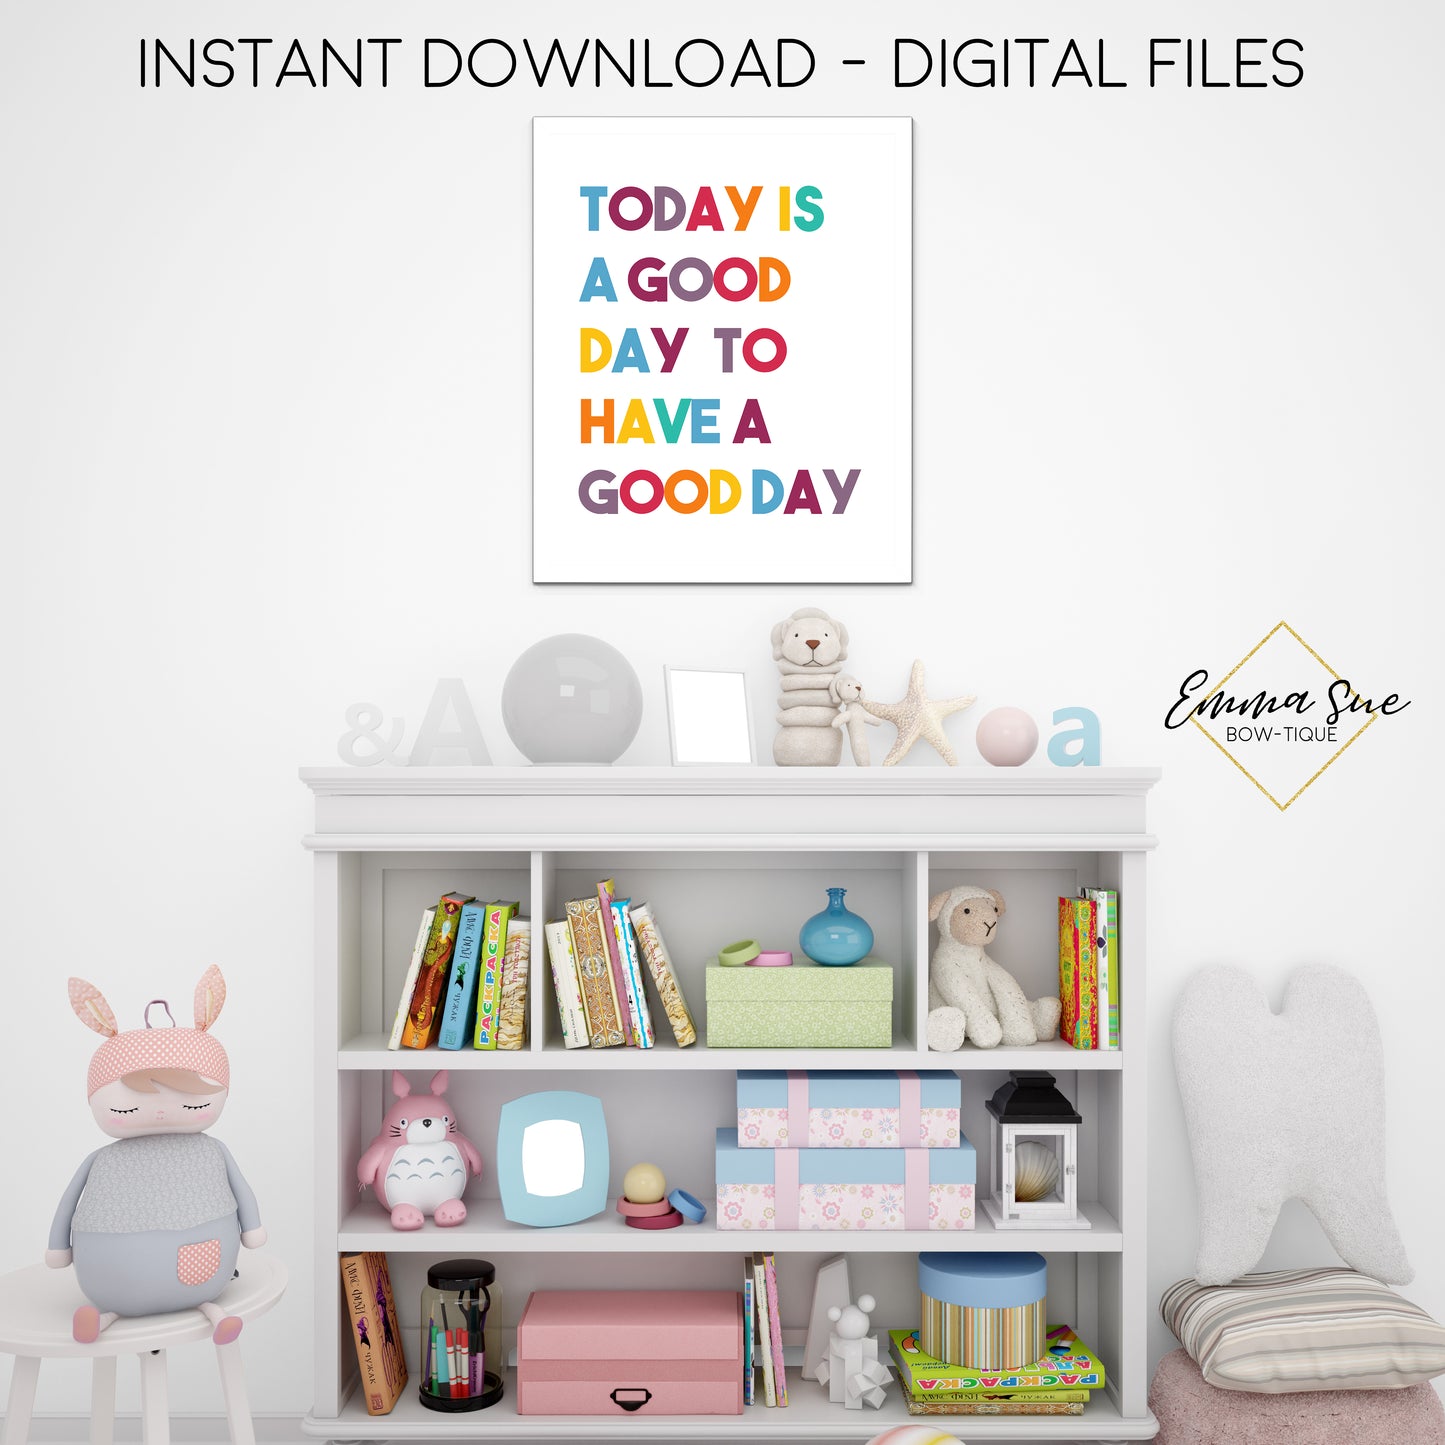 Today is a Good Day to Have a Good Day - Kid's School Classroom or Playroom Inspirational Printable Wall Art  - Digital File